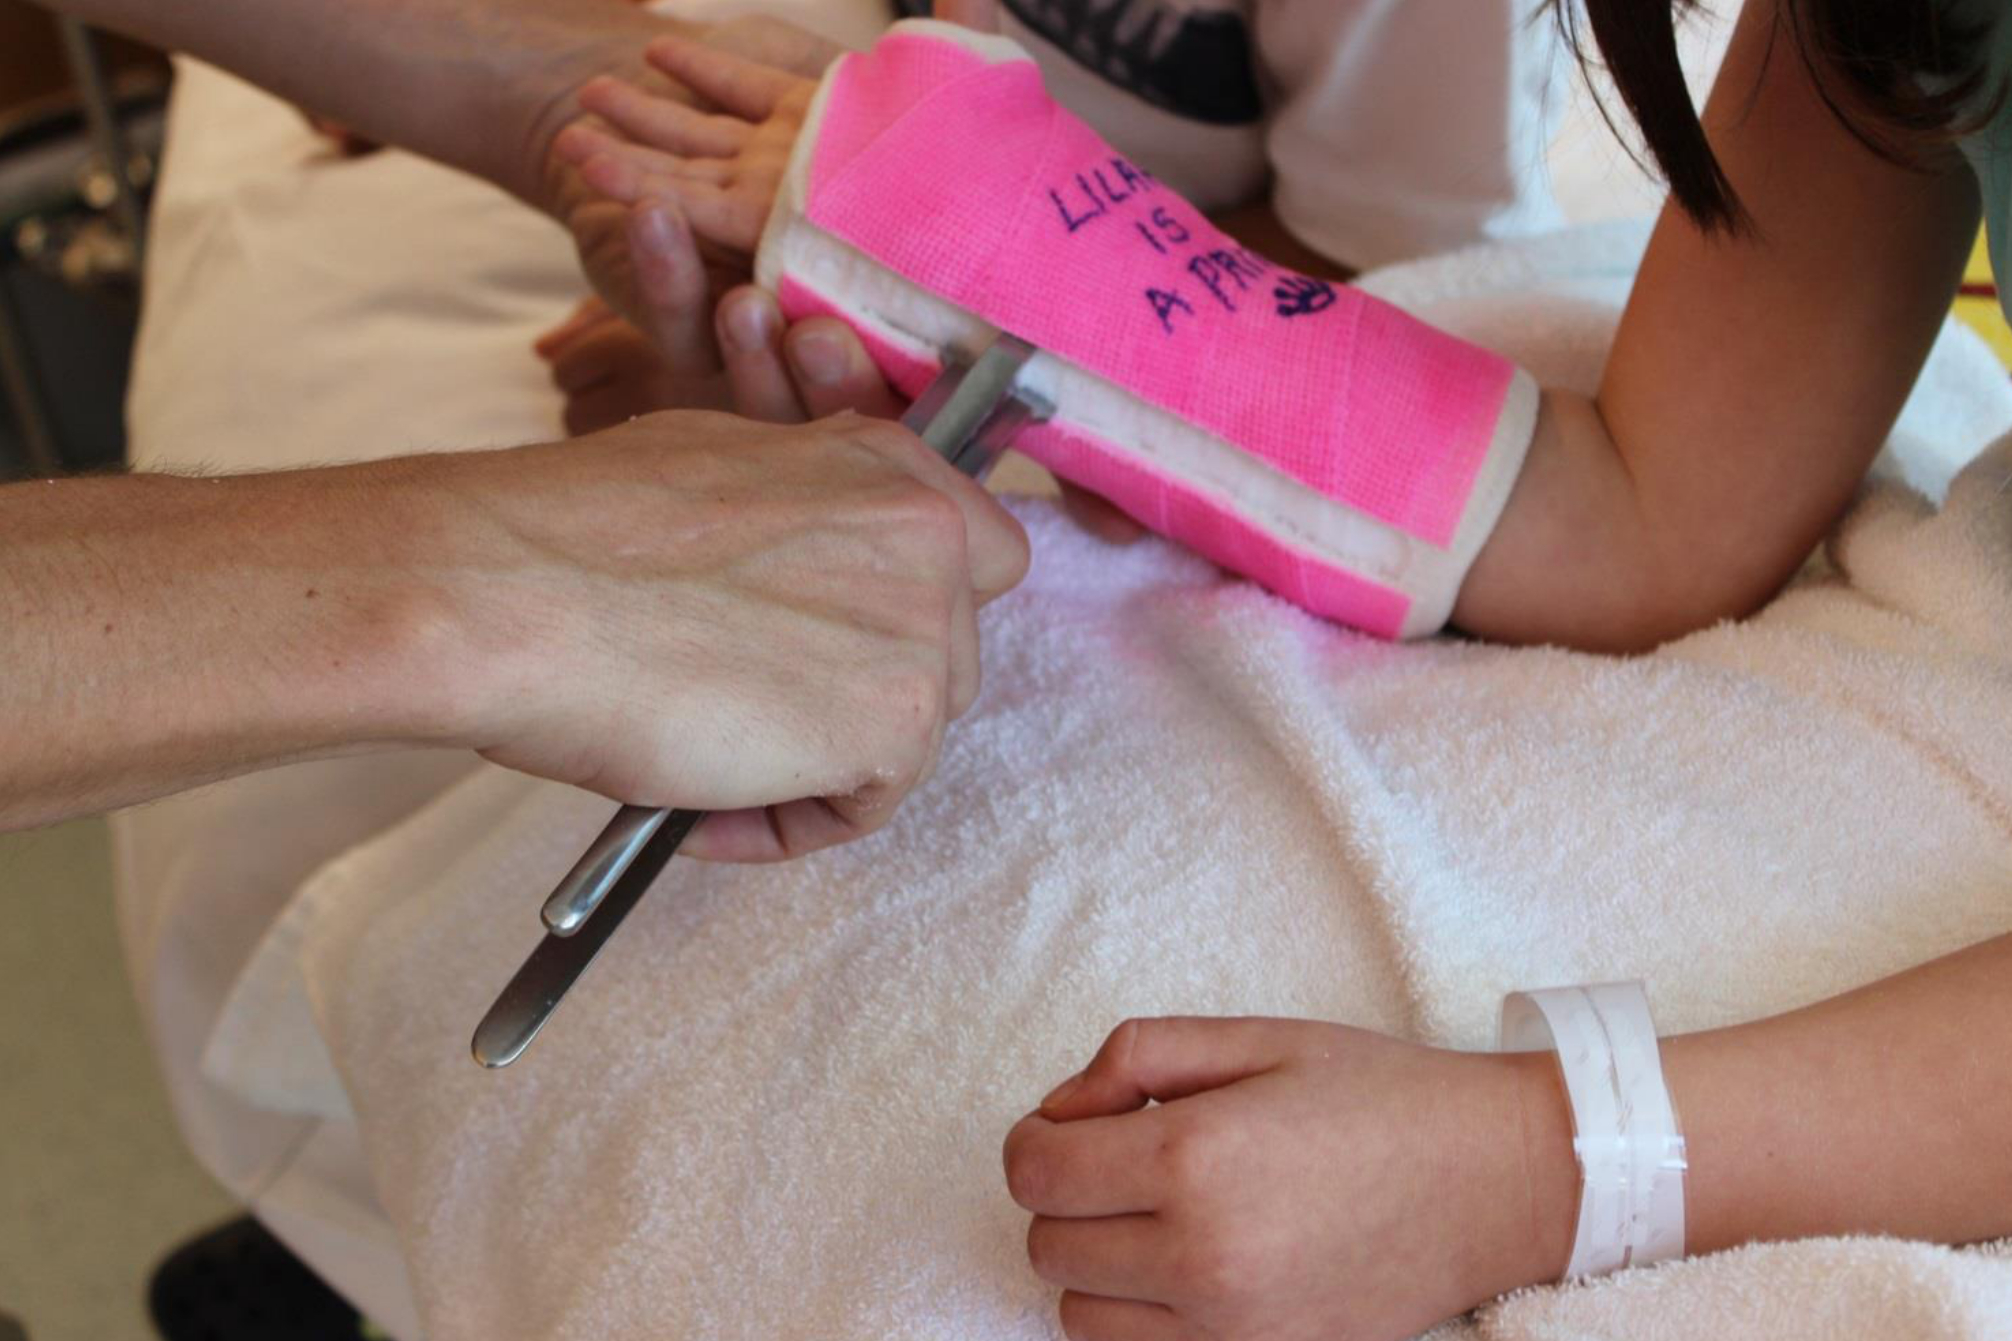 My Hospital Story: A girl's visit for cast removal